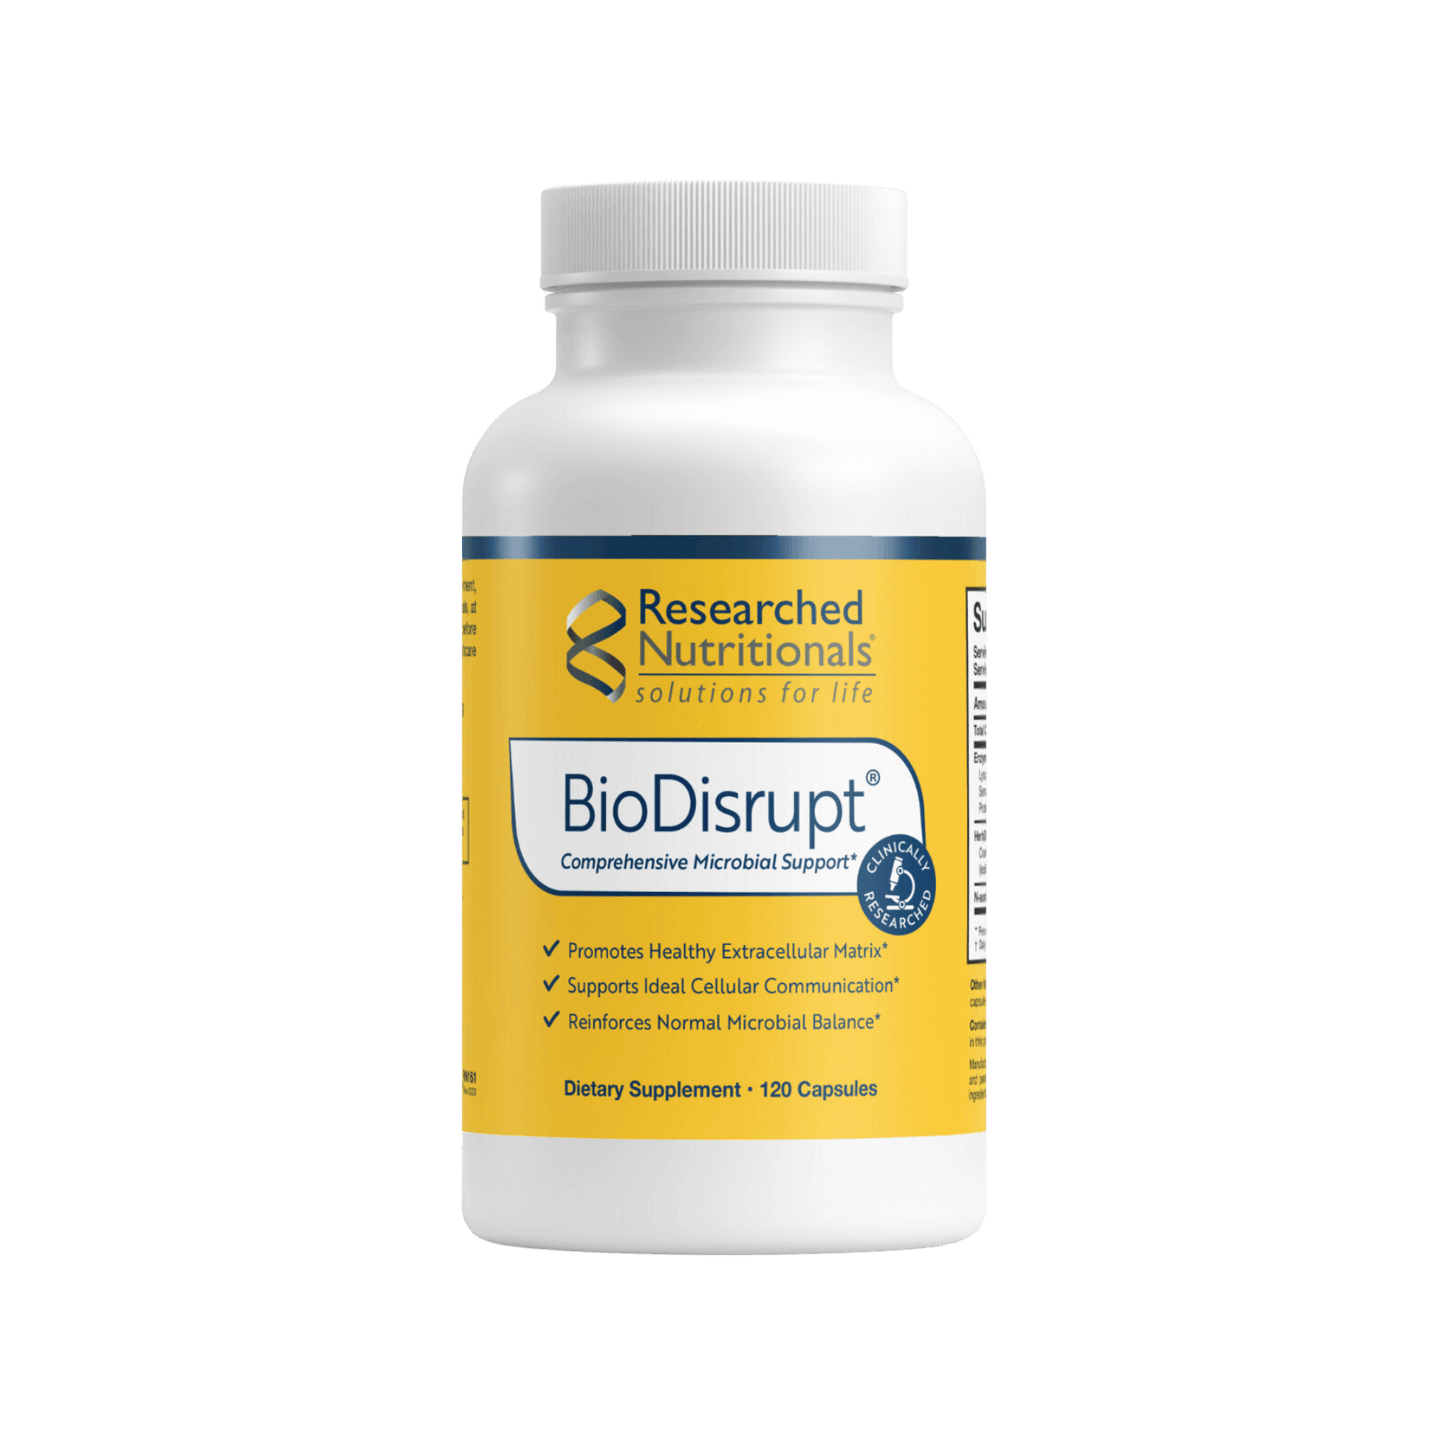 Researched Nutritionals BioDisrupt Capsules